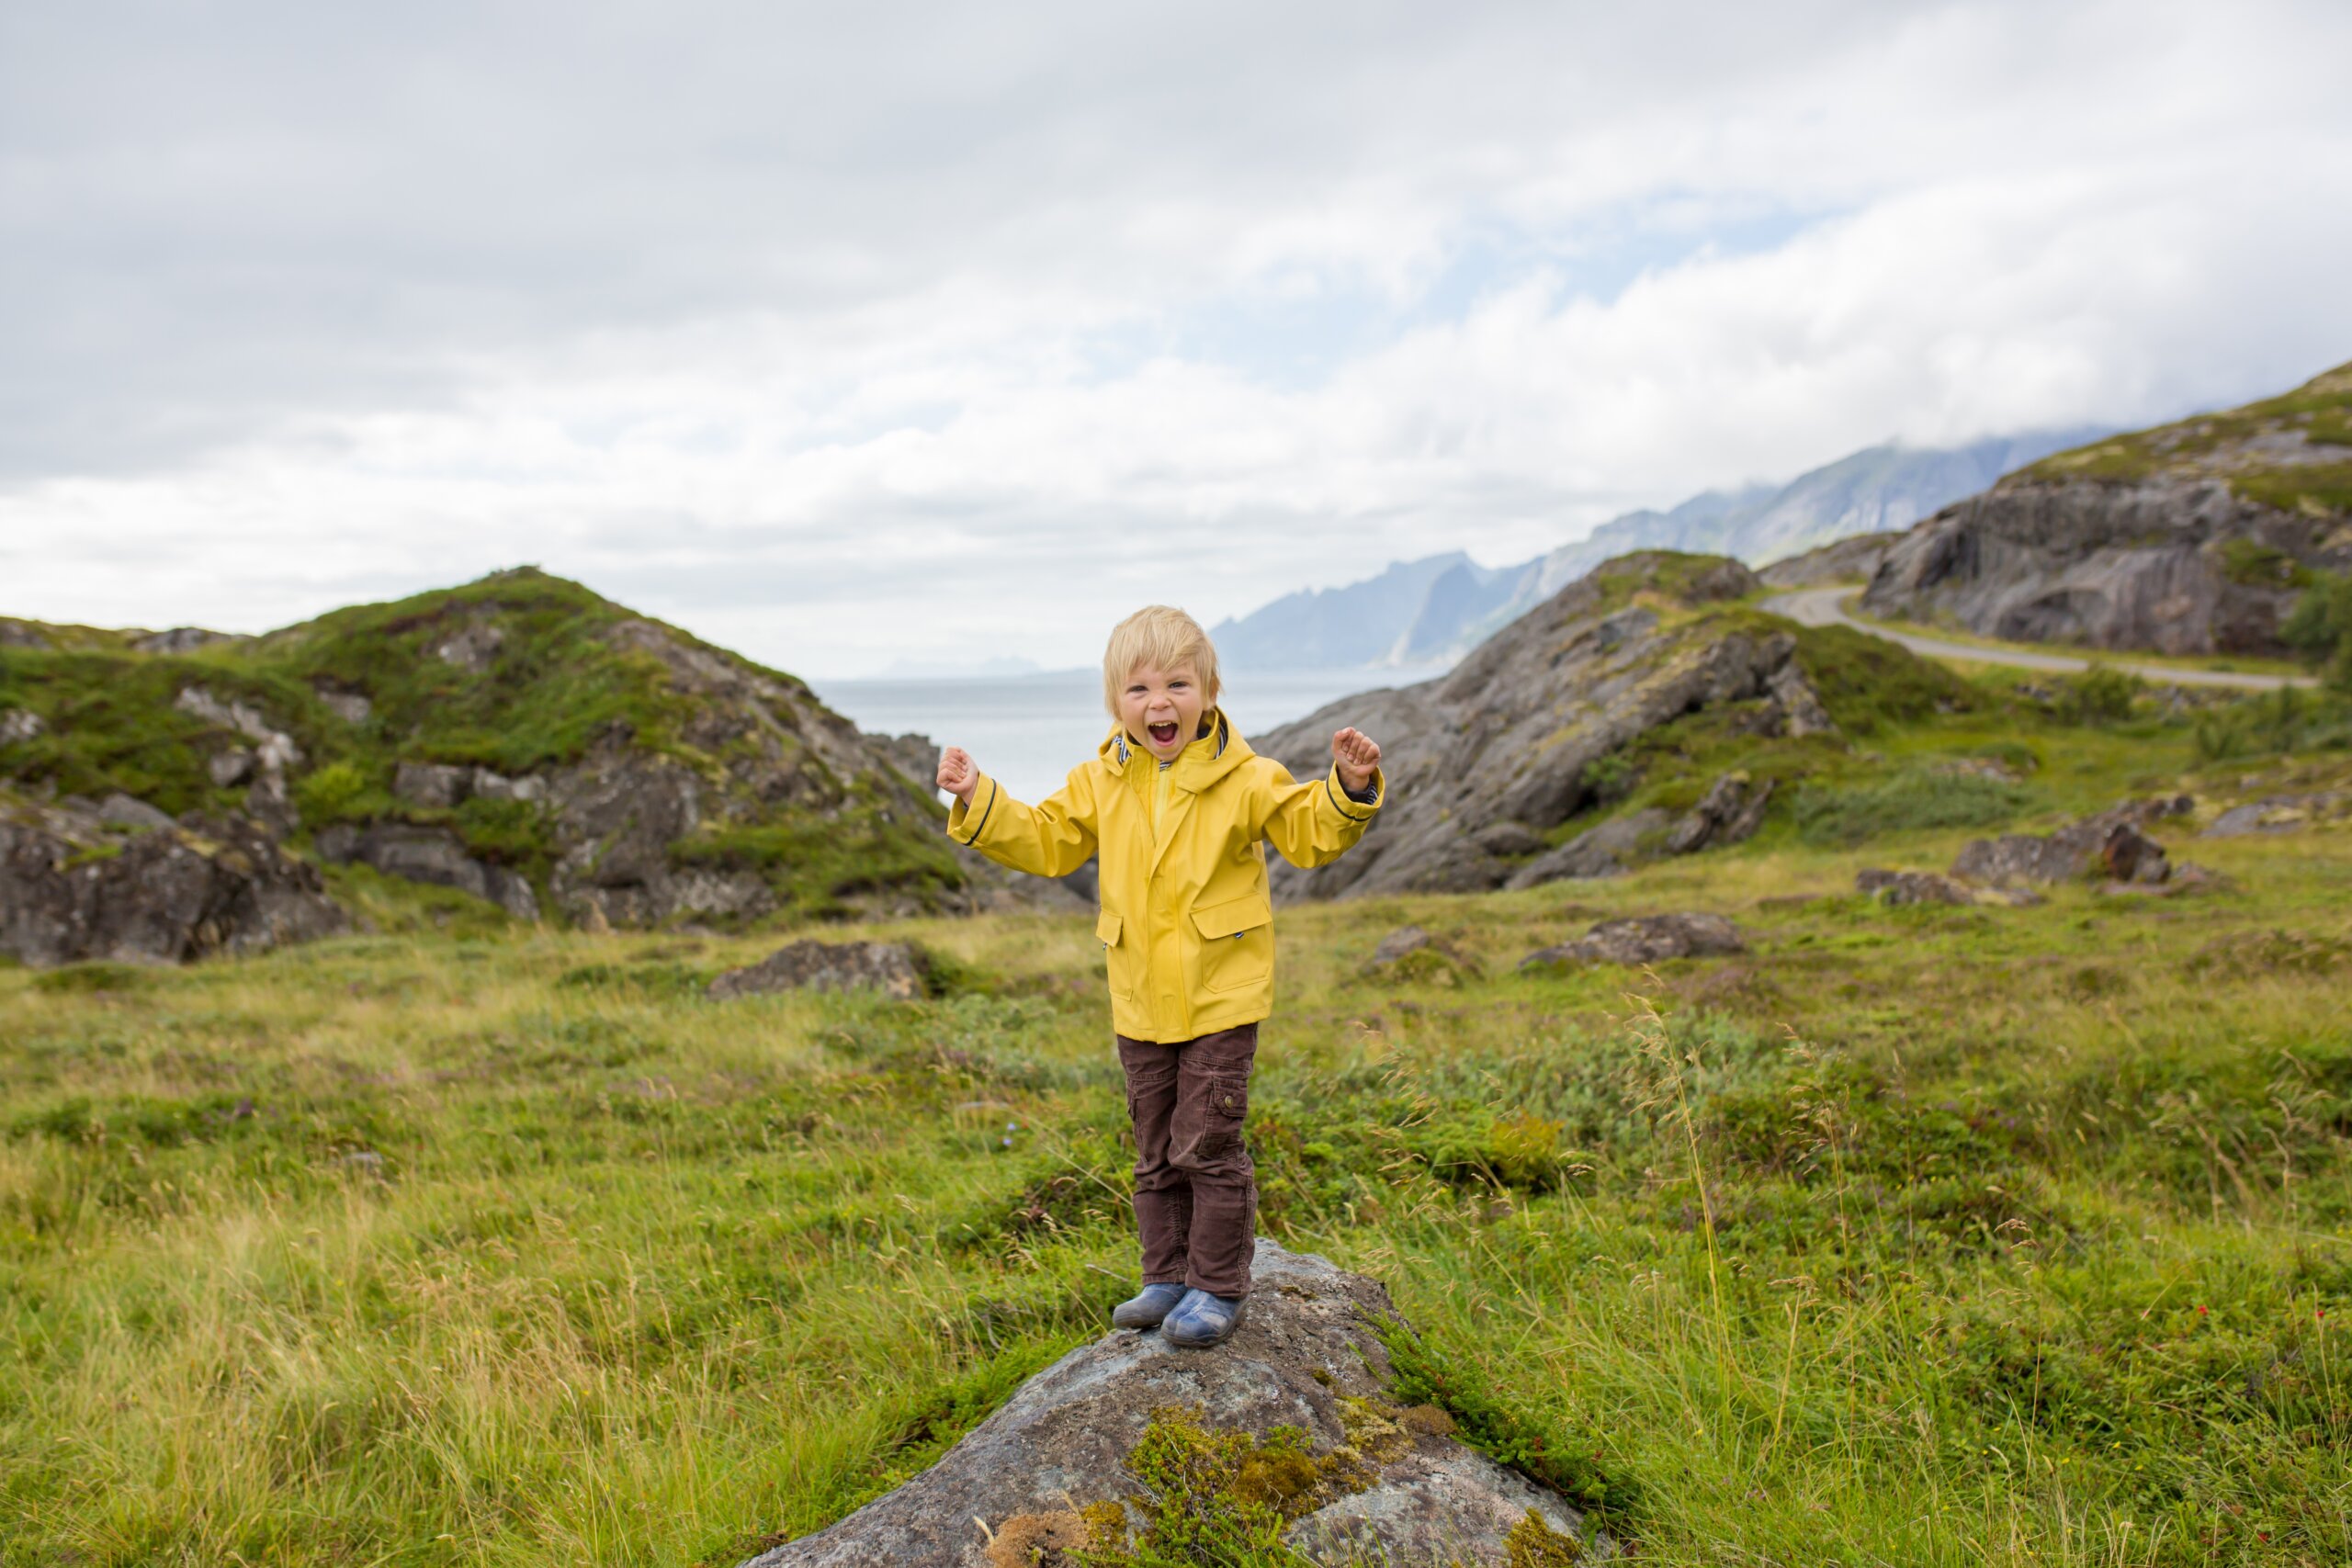 Author Helen Russell has looked into the fascinating cultural differences in the Nordic countries that have led to them having some of the happiest kids in the world